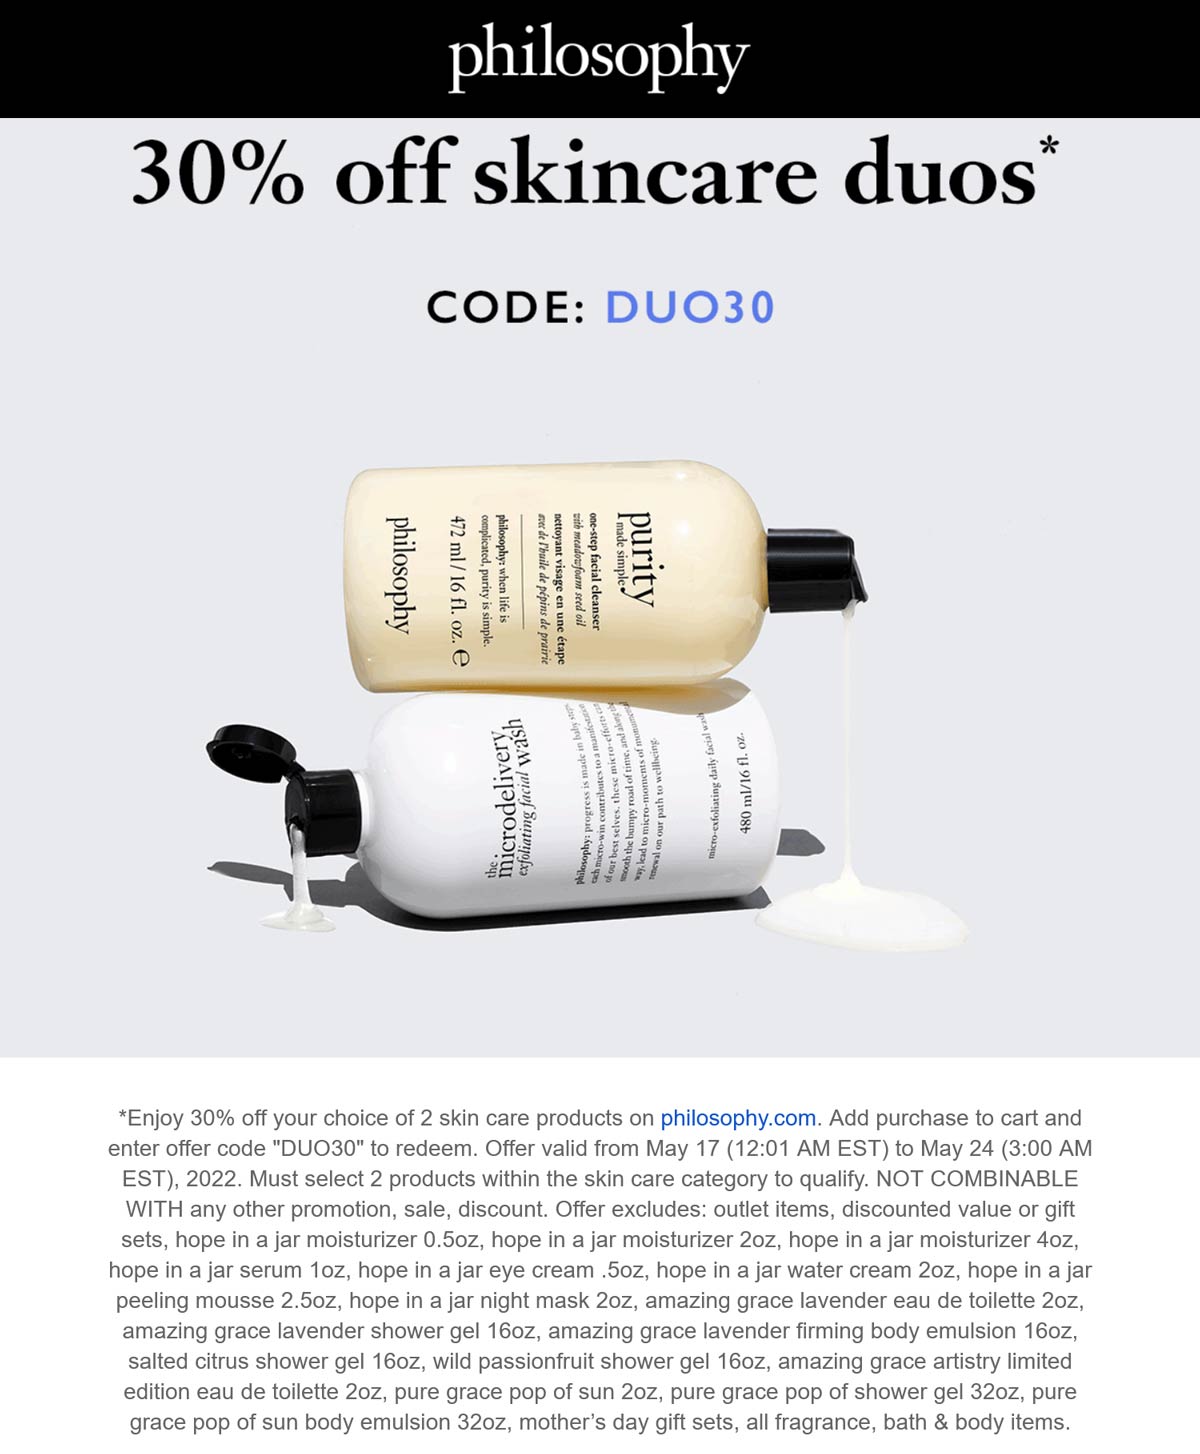 Philosophy stores Coupon  30% off 2 skin care products at Philosophy via promo code DUO30 #philosophy 